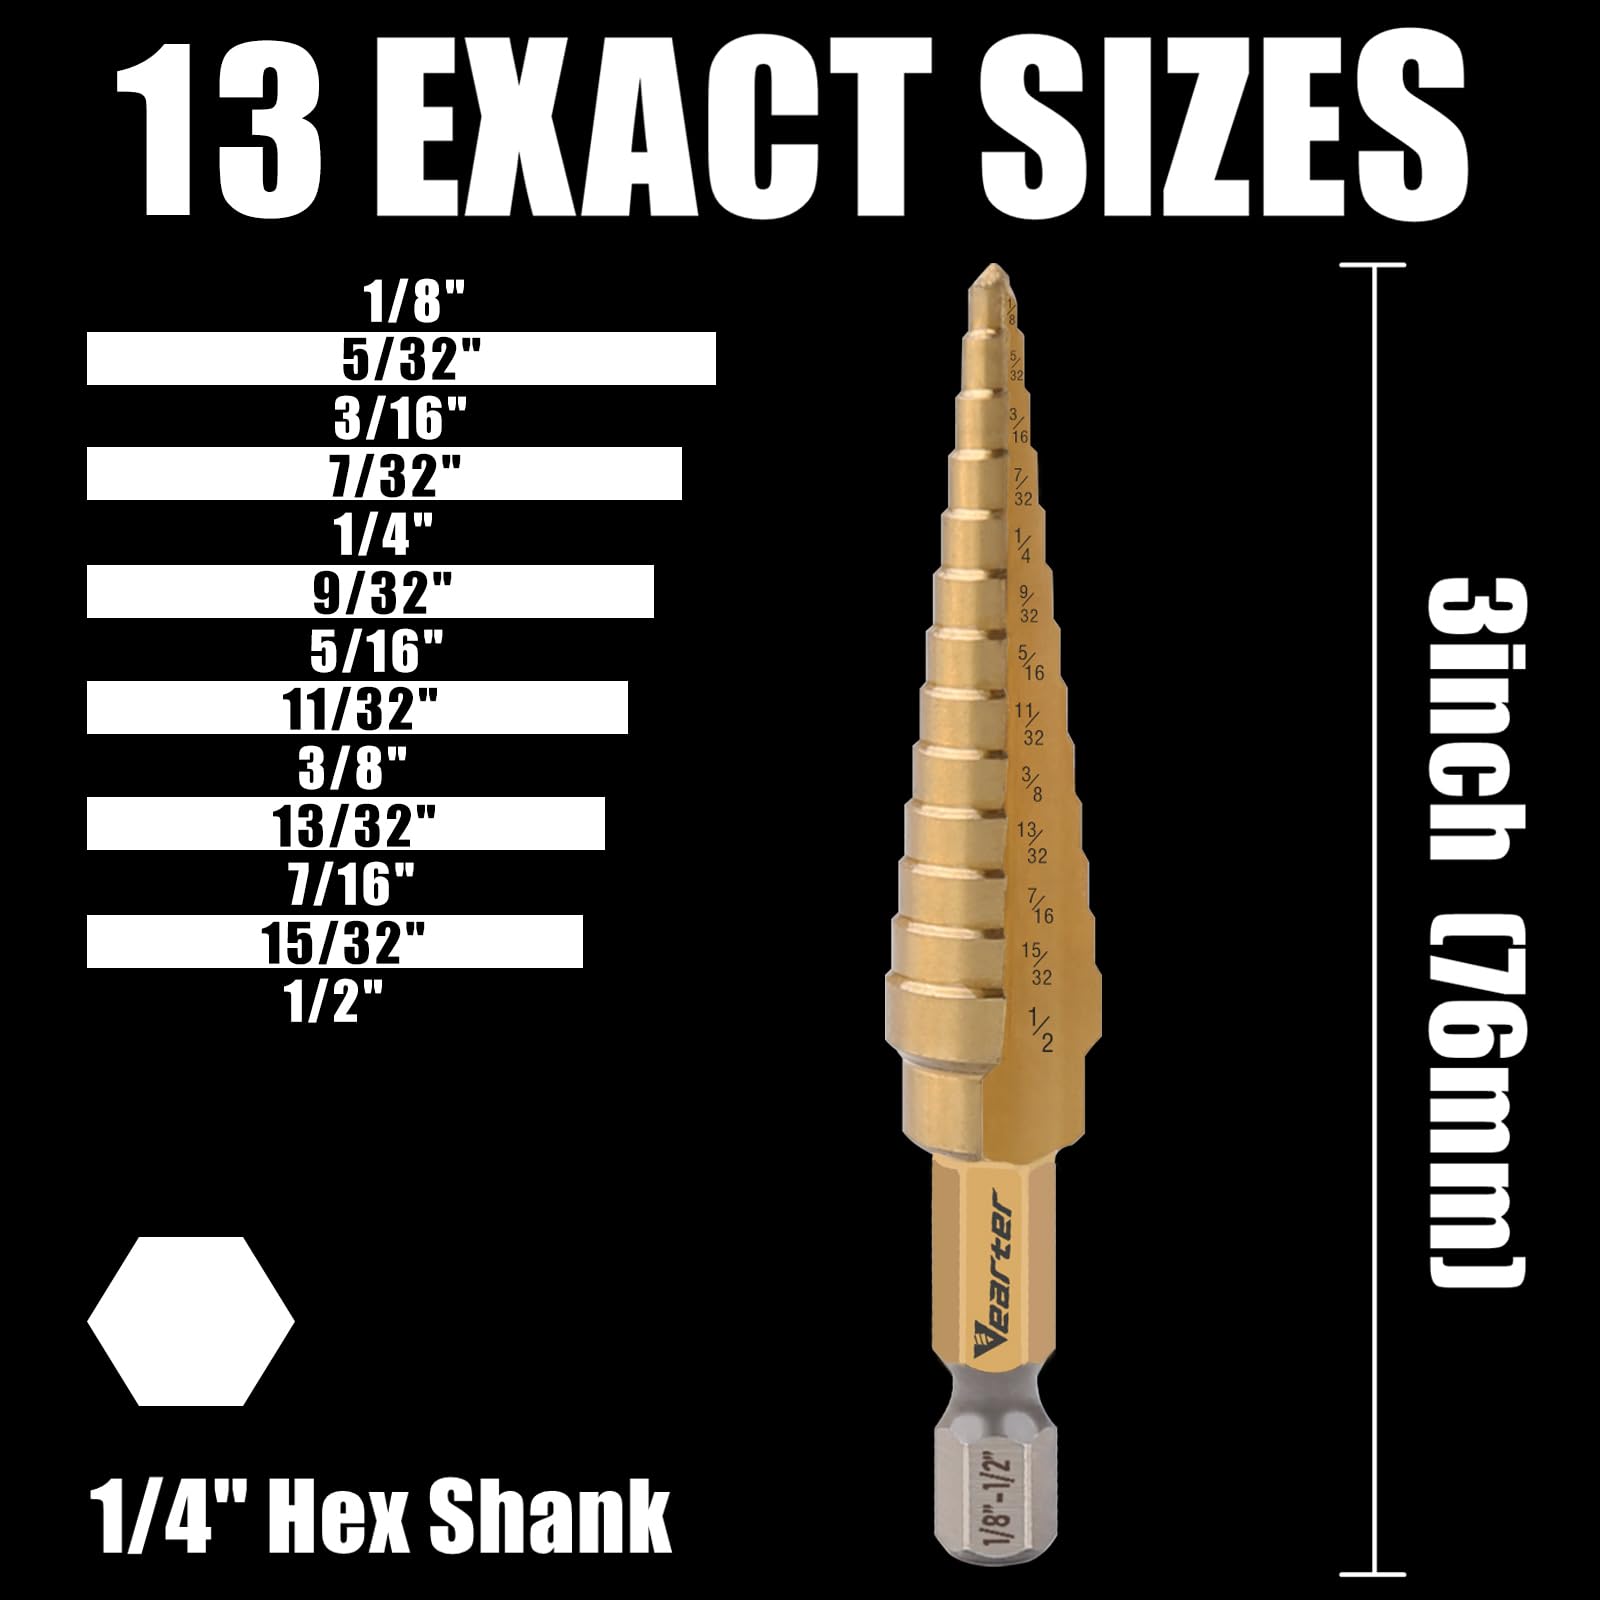 Vearter HSS Straight Groove Step Drill Bits, 1/8" - 1/2" Unibit 13 Steps M2 Material Titanium Coated Hex Shank for Drilling Holes in Stainless Steel Aluminium Sheet Metal Wood Plastic PVC